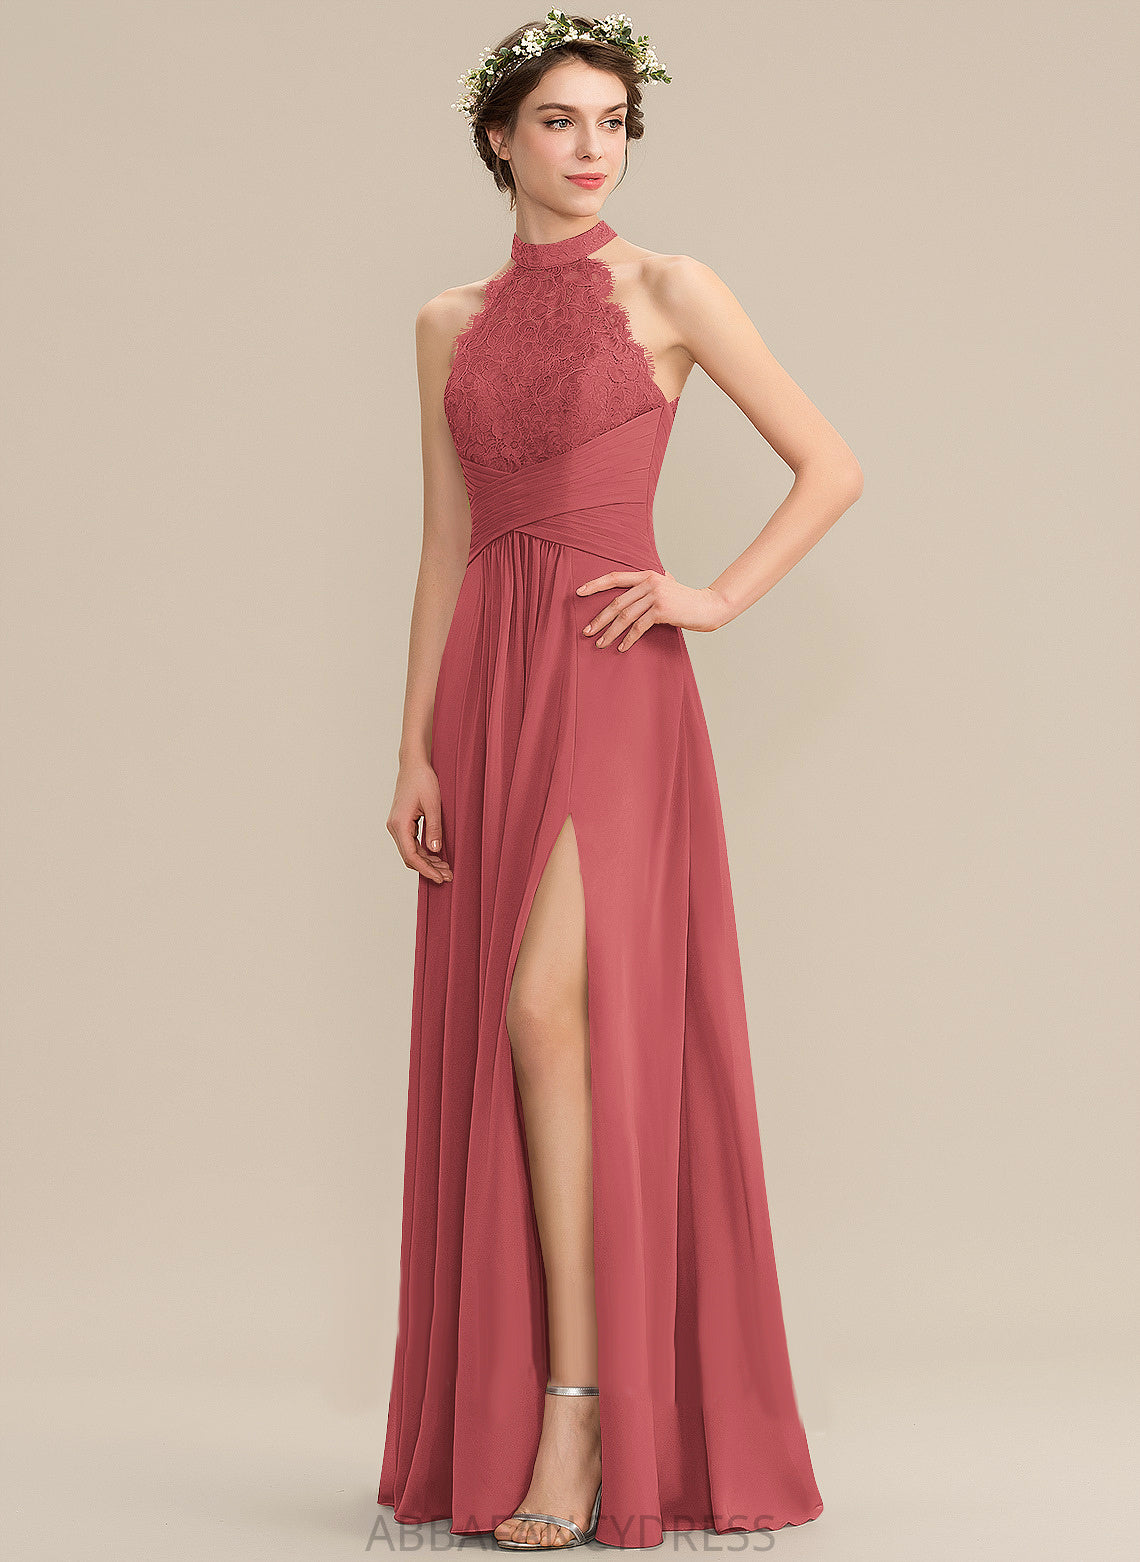 Split Floor-Length With High Front Neck Lace Prom Dresses A-Line Chiffon Ruffle Danielle